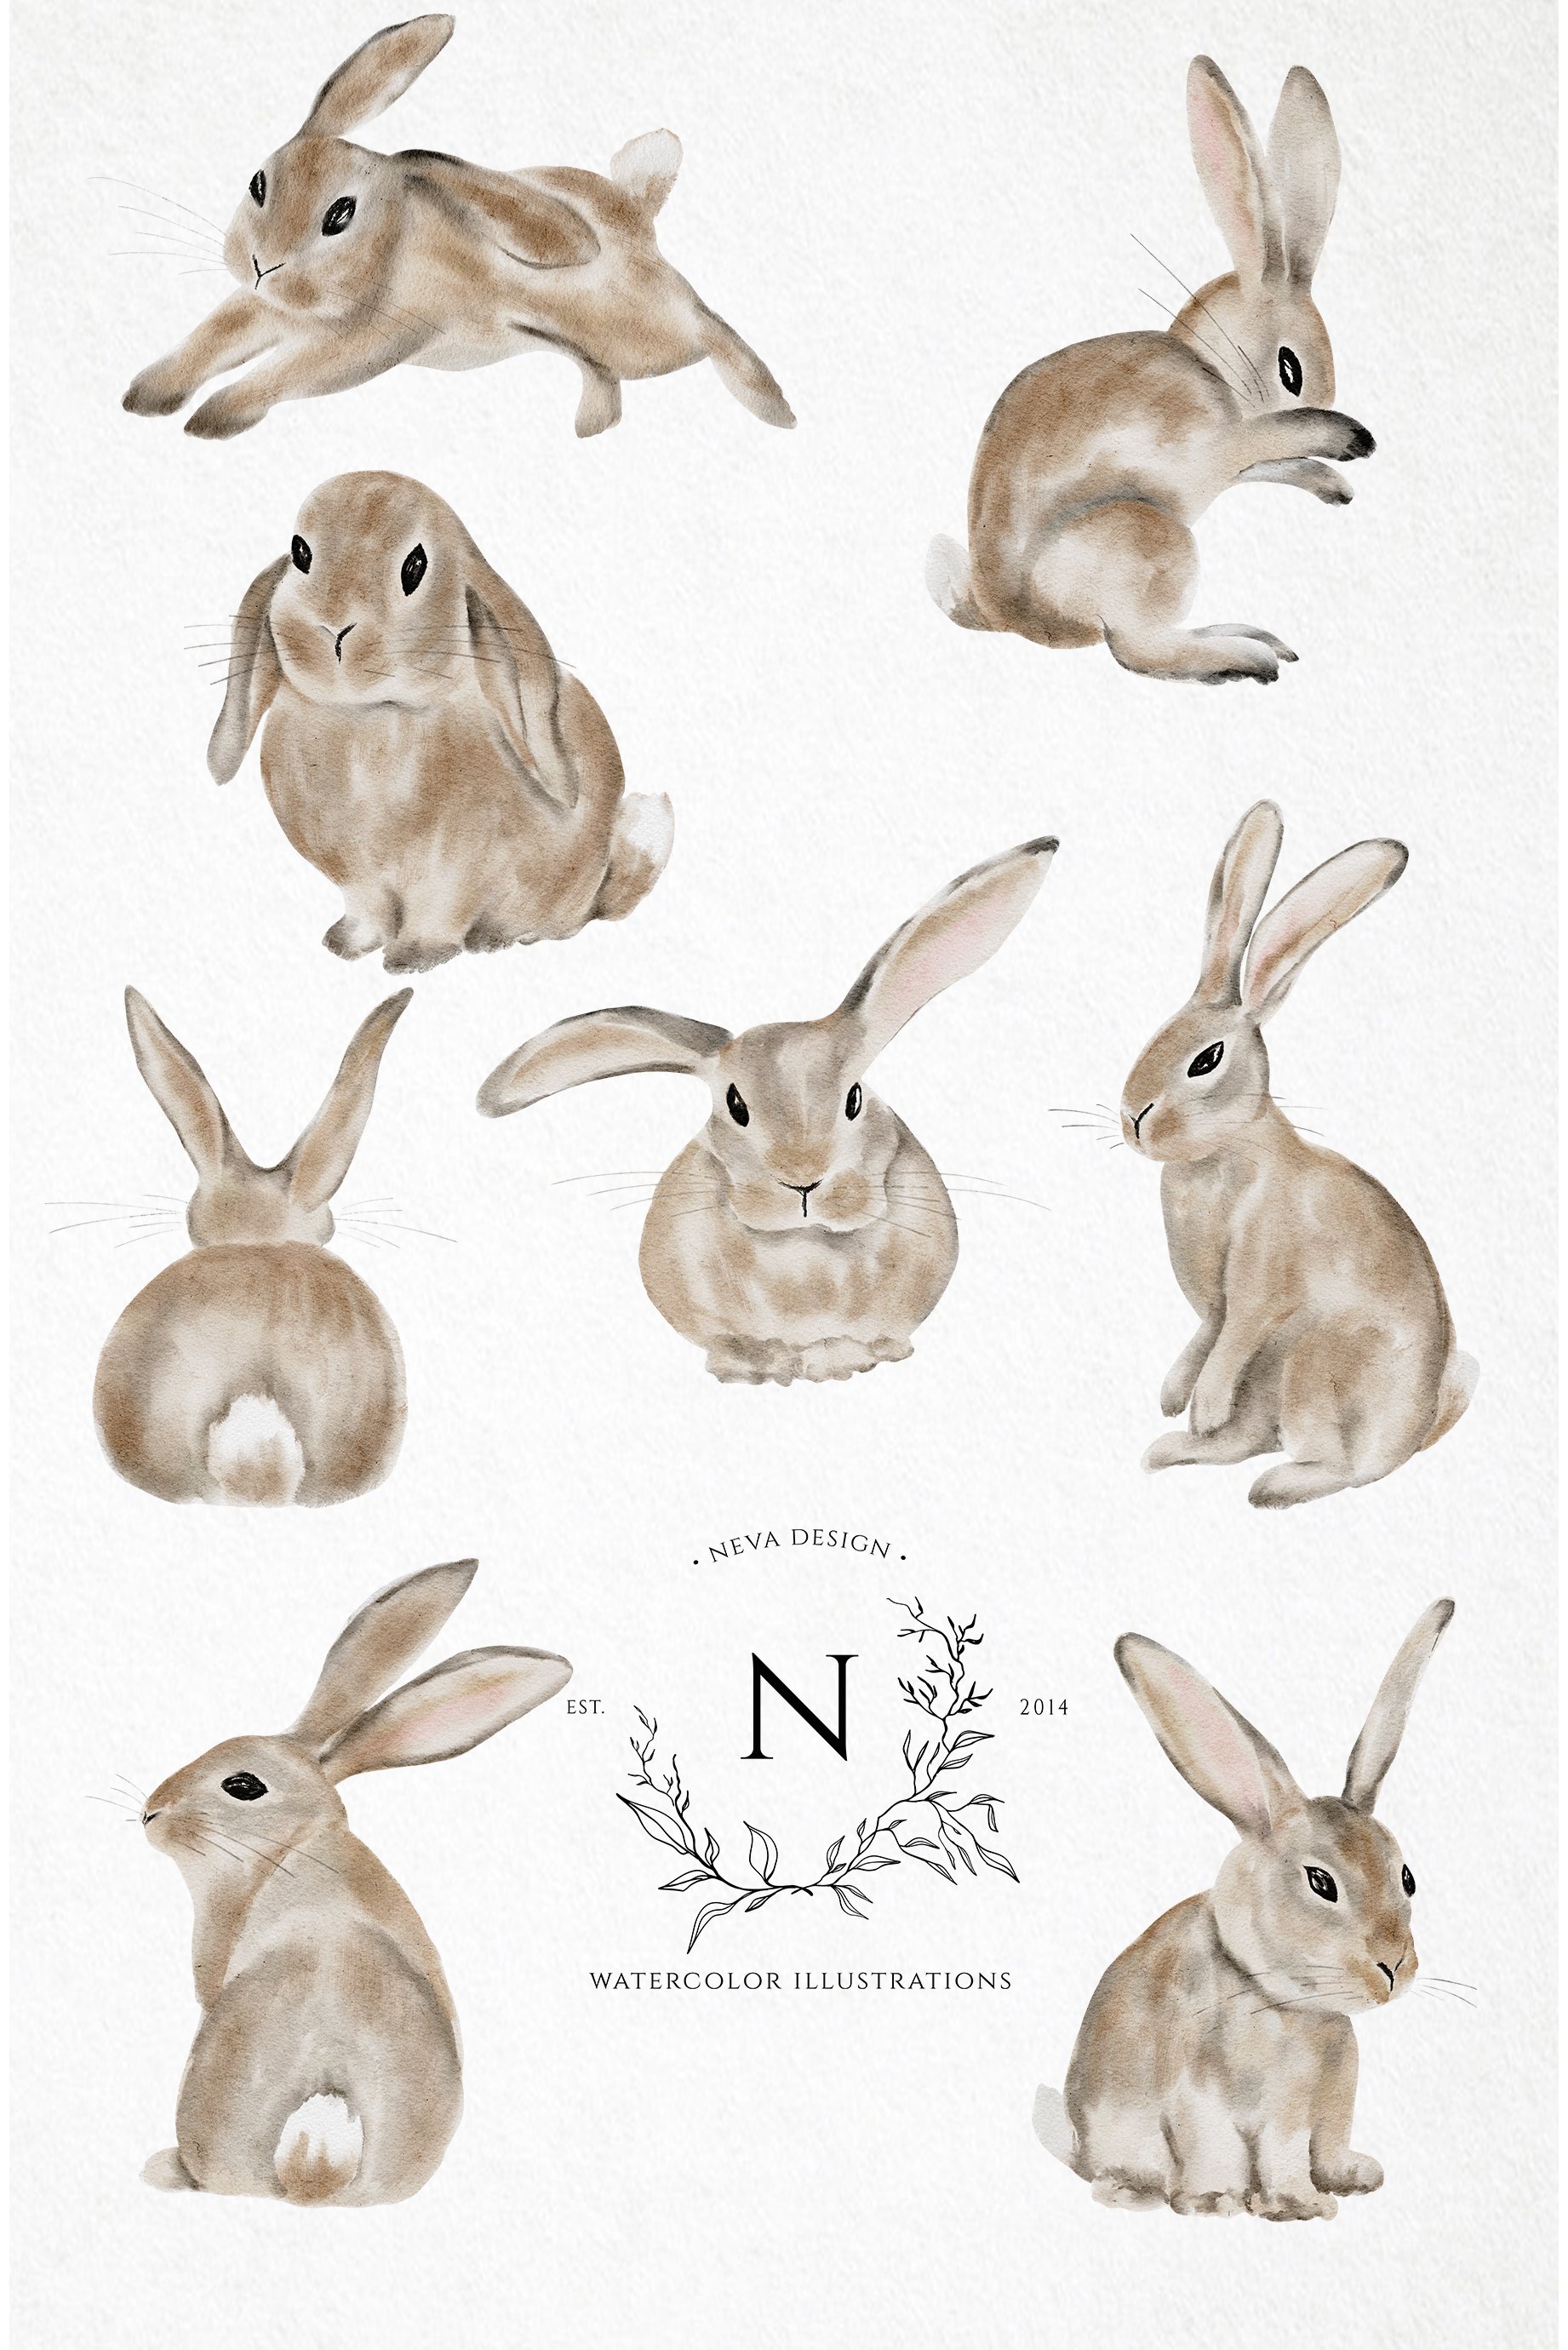 So cute beige bunny in the different conditions.